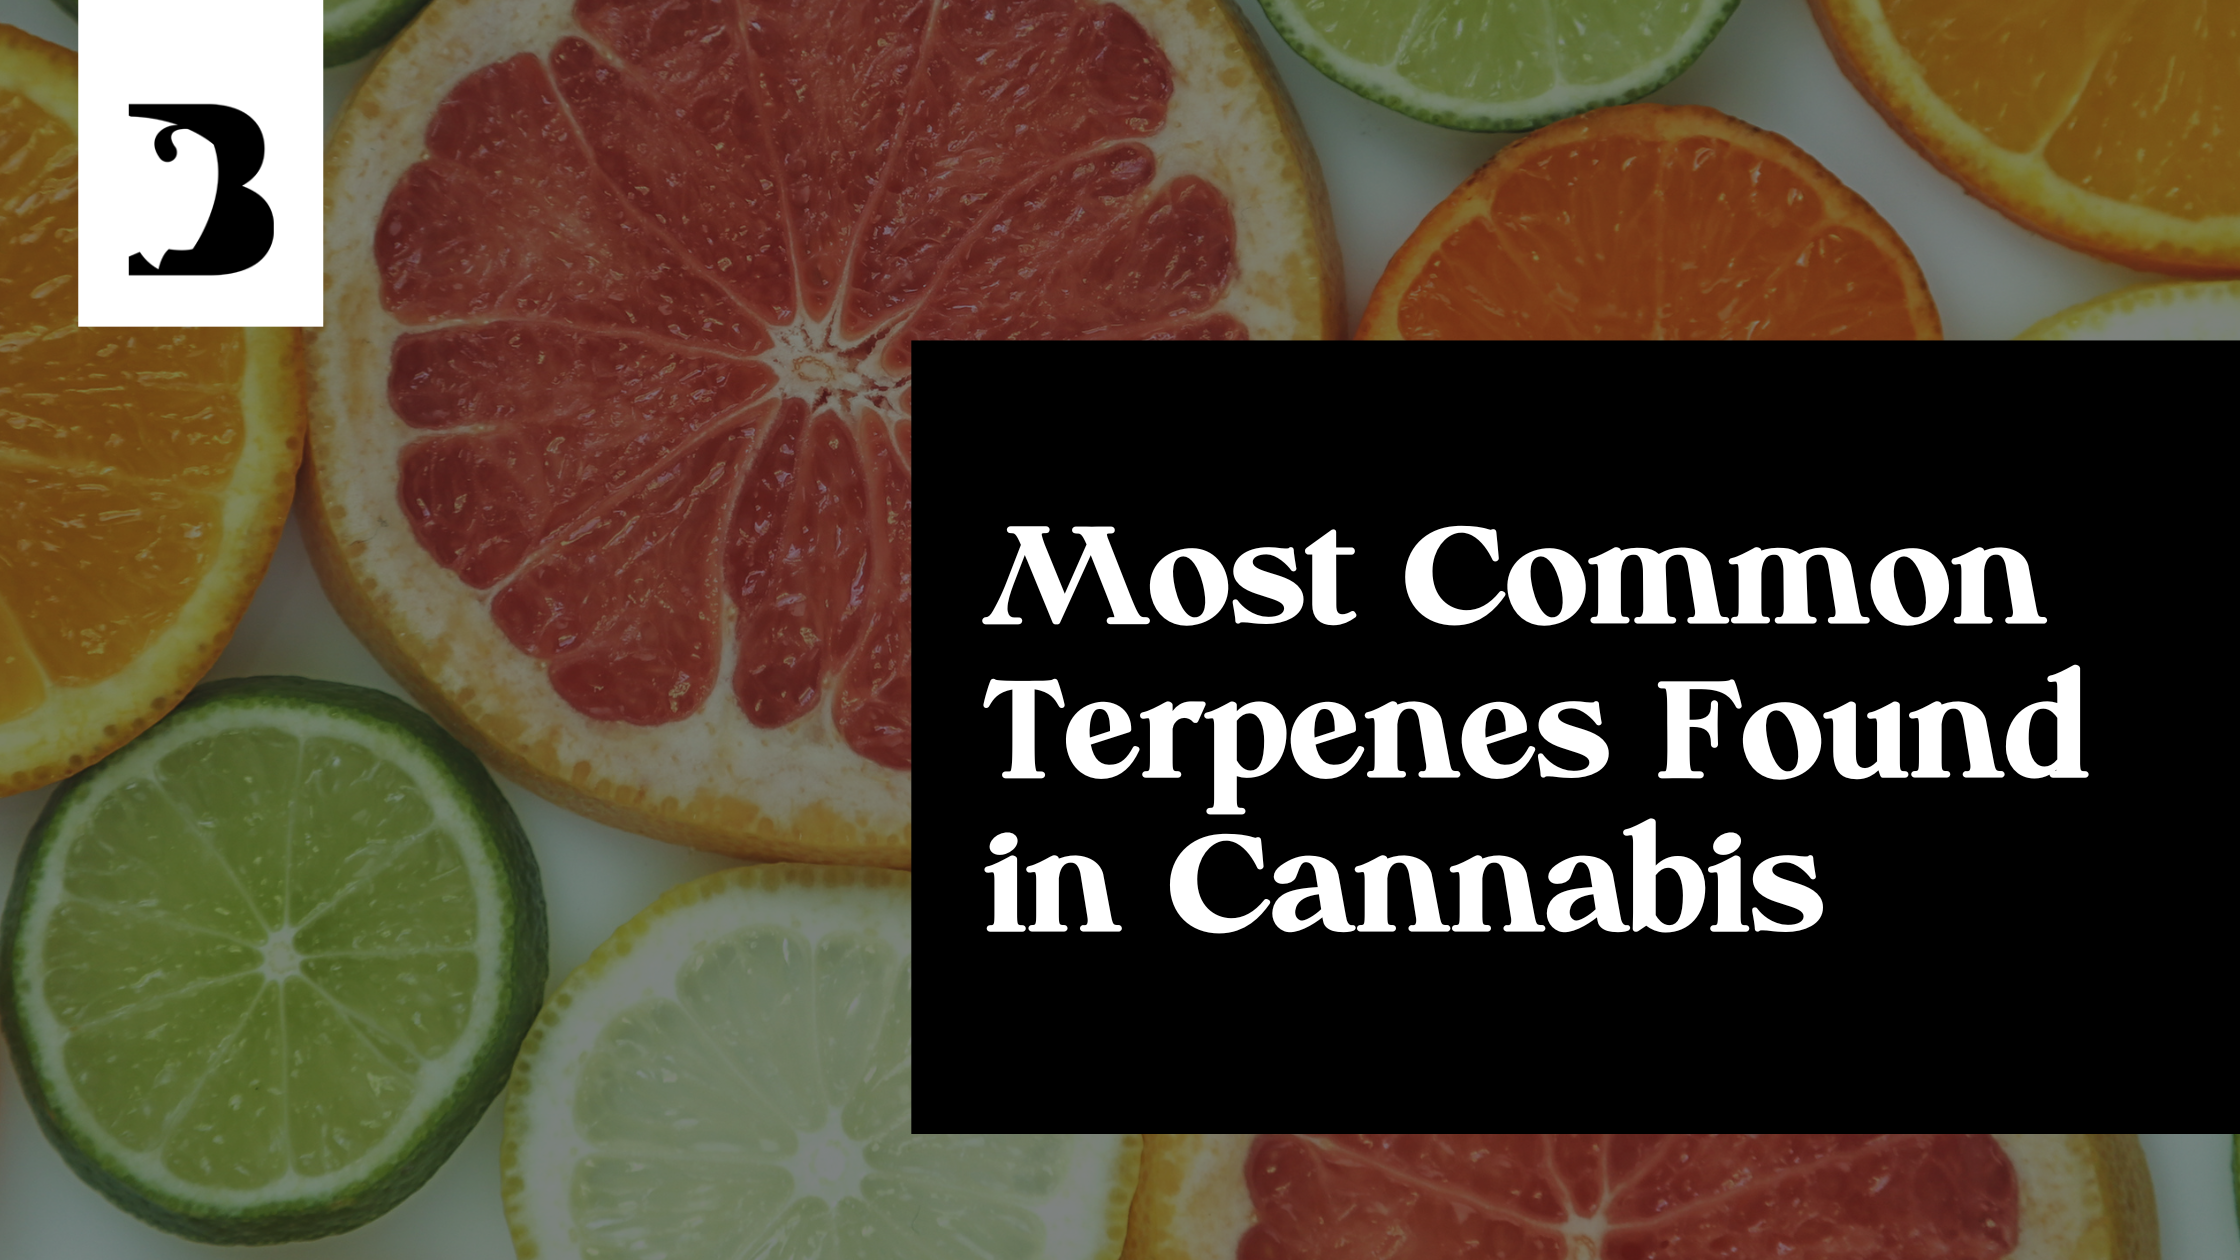 Most Common Terpenes Found in Cannabis